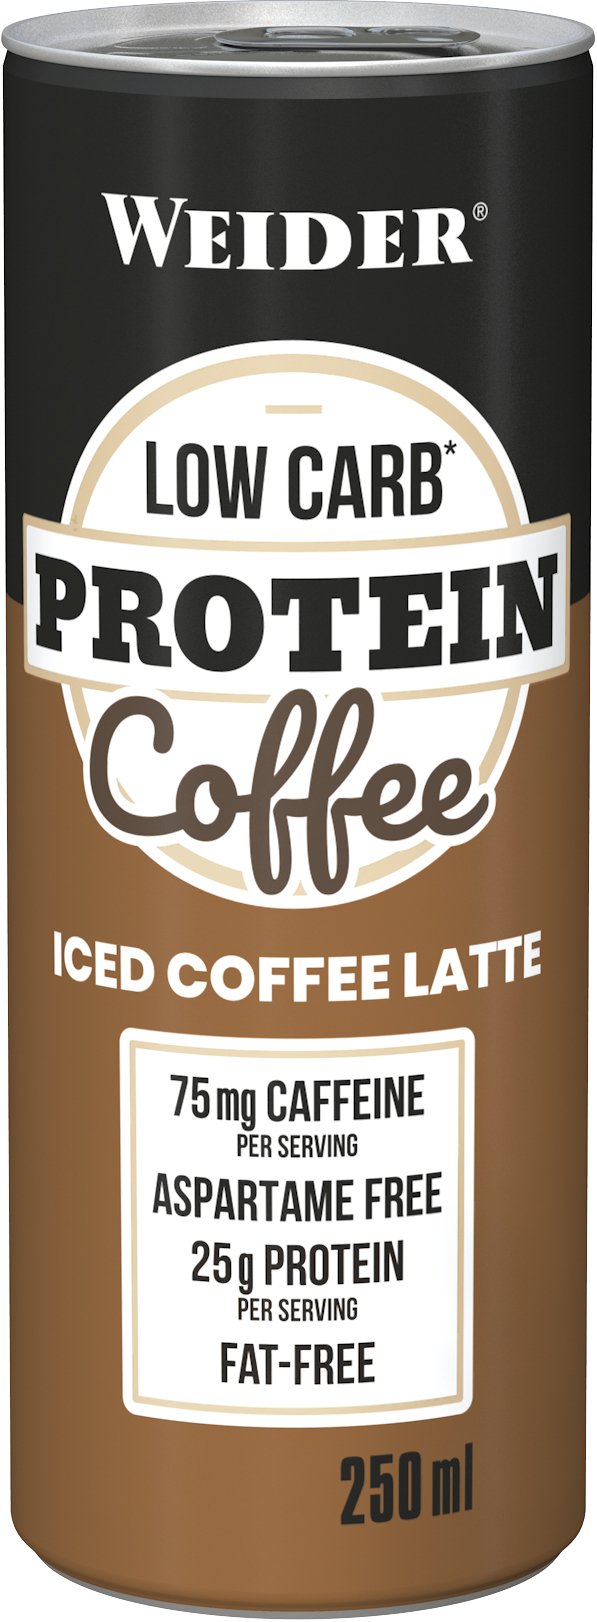 Weider Low Carb Protein Coffee Latte, 250ml